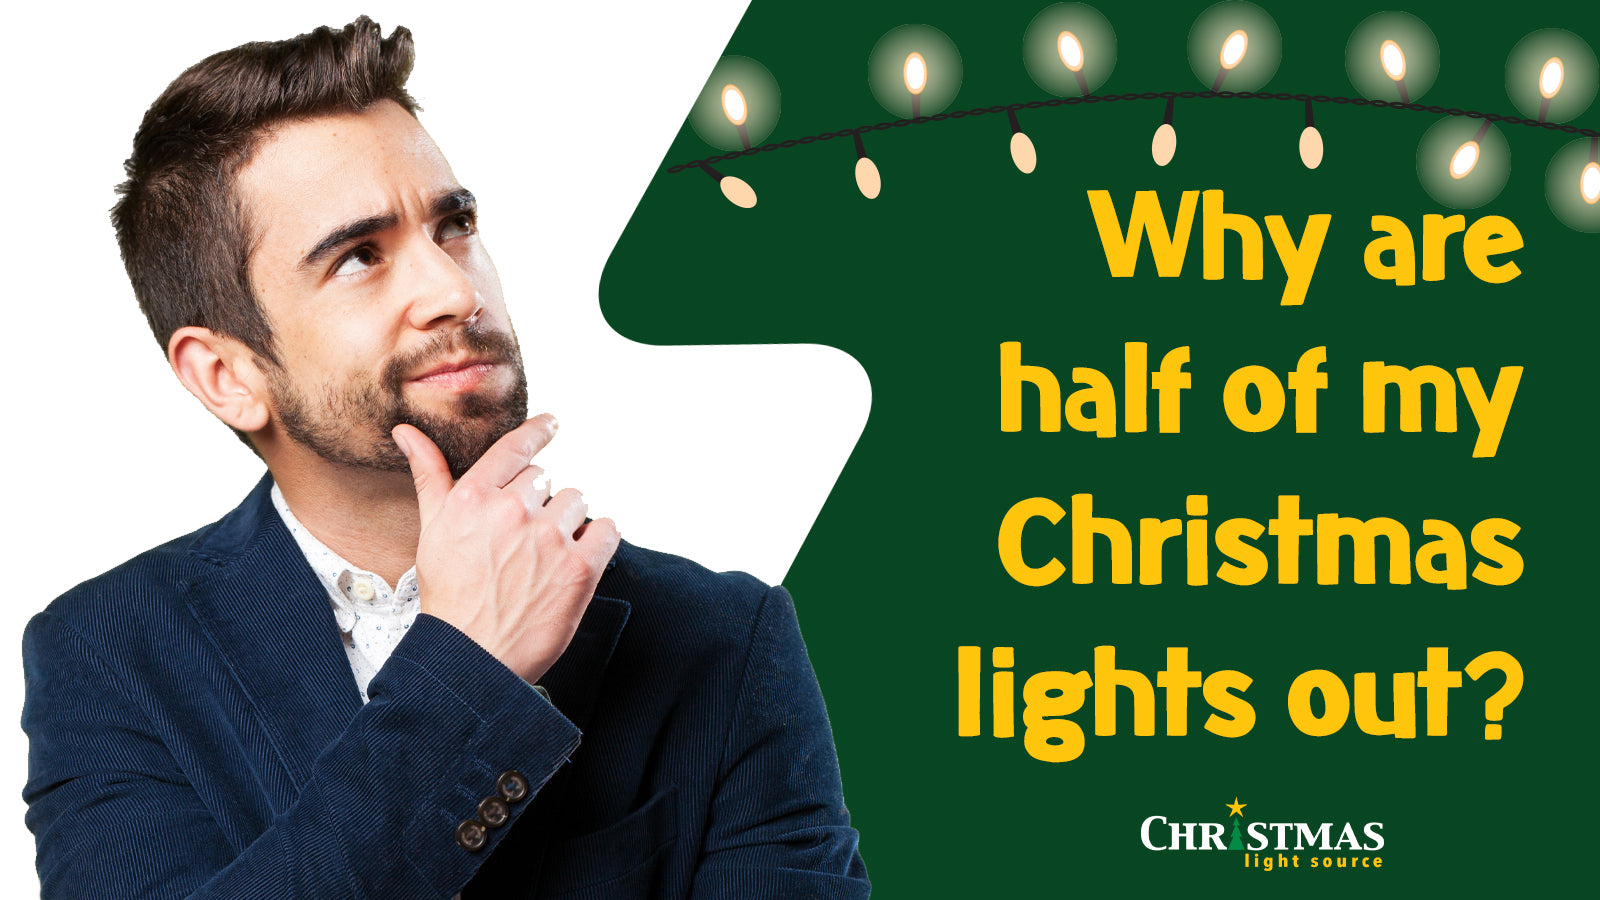 Why are half of my Christmas lights out?